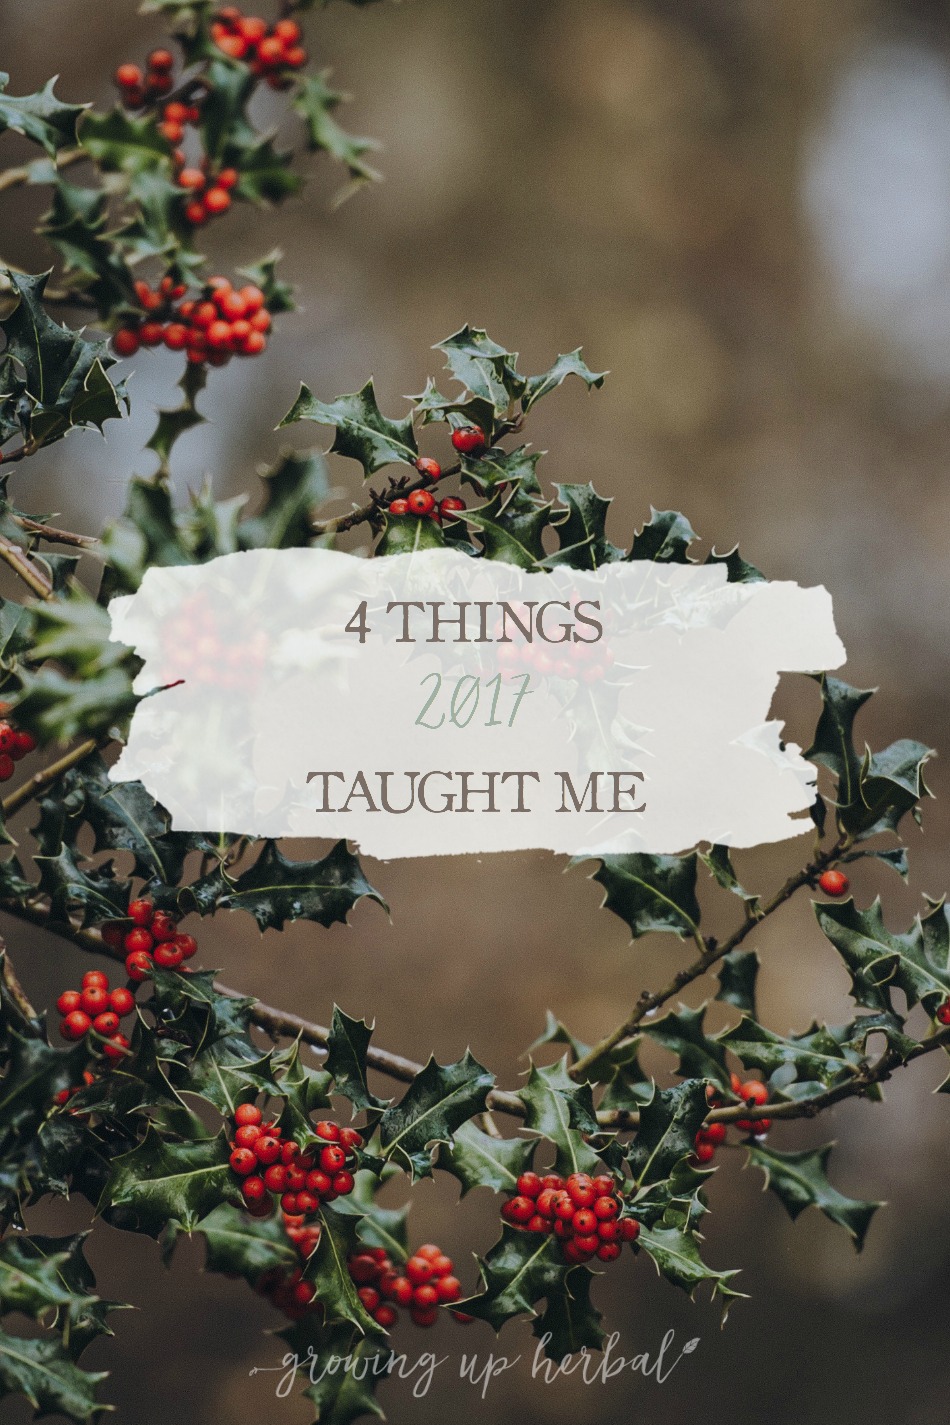 4 Things 2017 Taught Me | Growing Up Herbal | Being mindful and learning from our successes and failures is an important part of living. Here, I’m sharing four life lessons I learned in 2017.